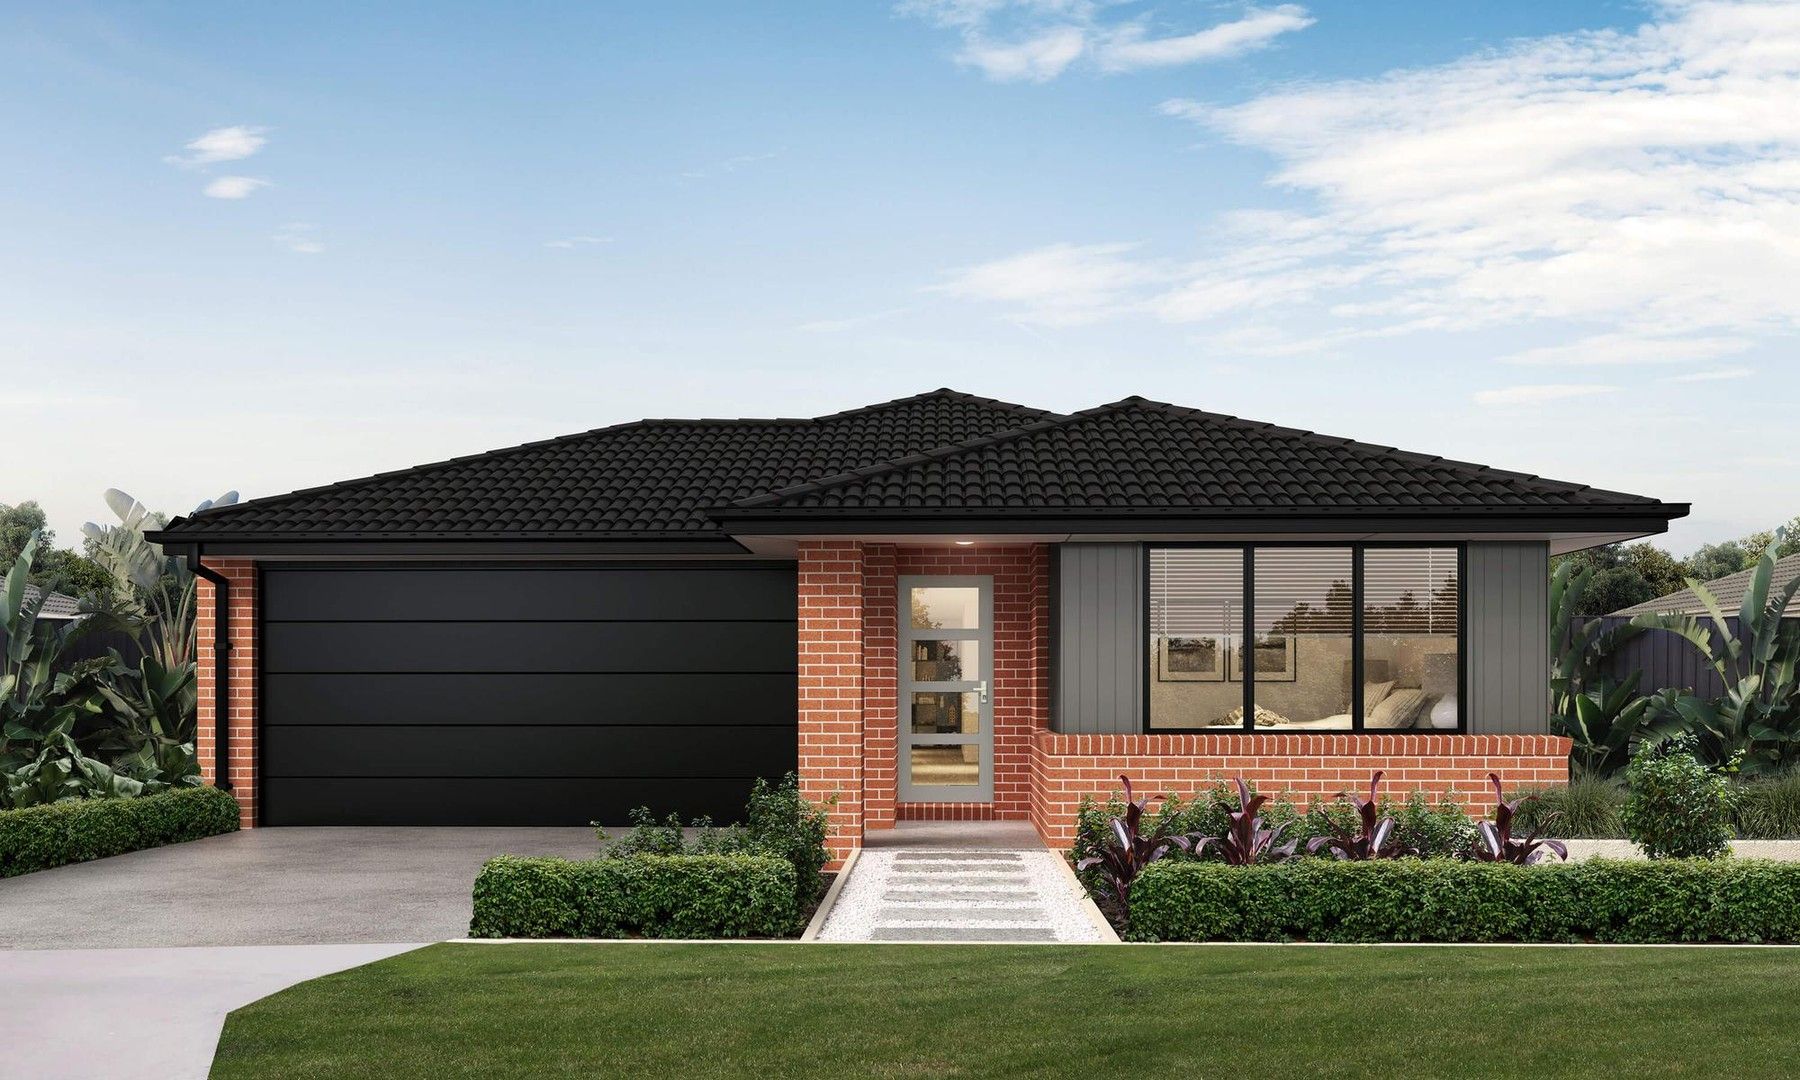 4 bedrooms New House & Land in 602 Sapphire Estate CRANBOURNE VIC, 3977